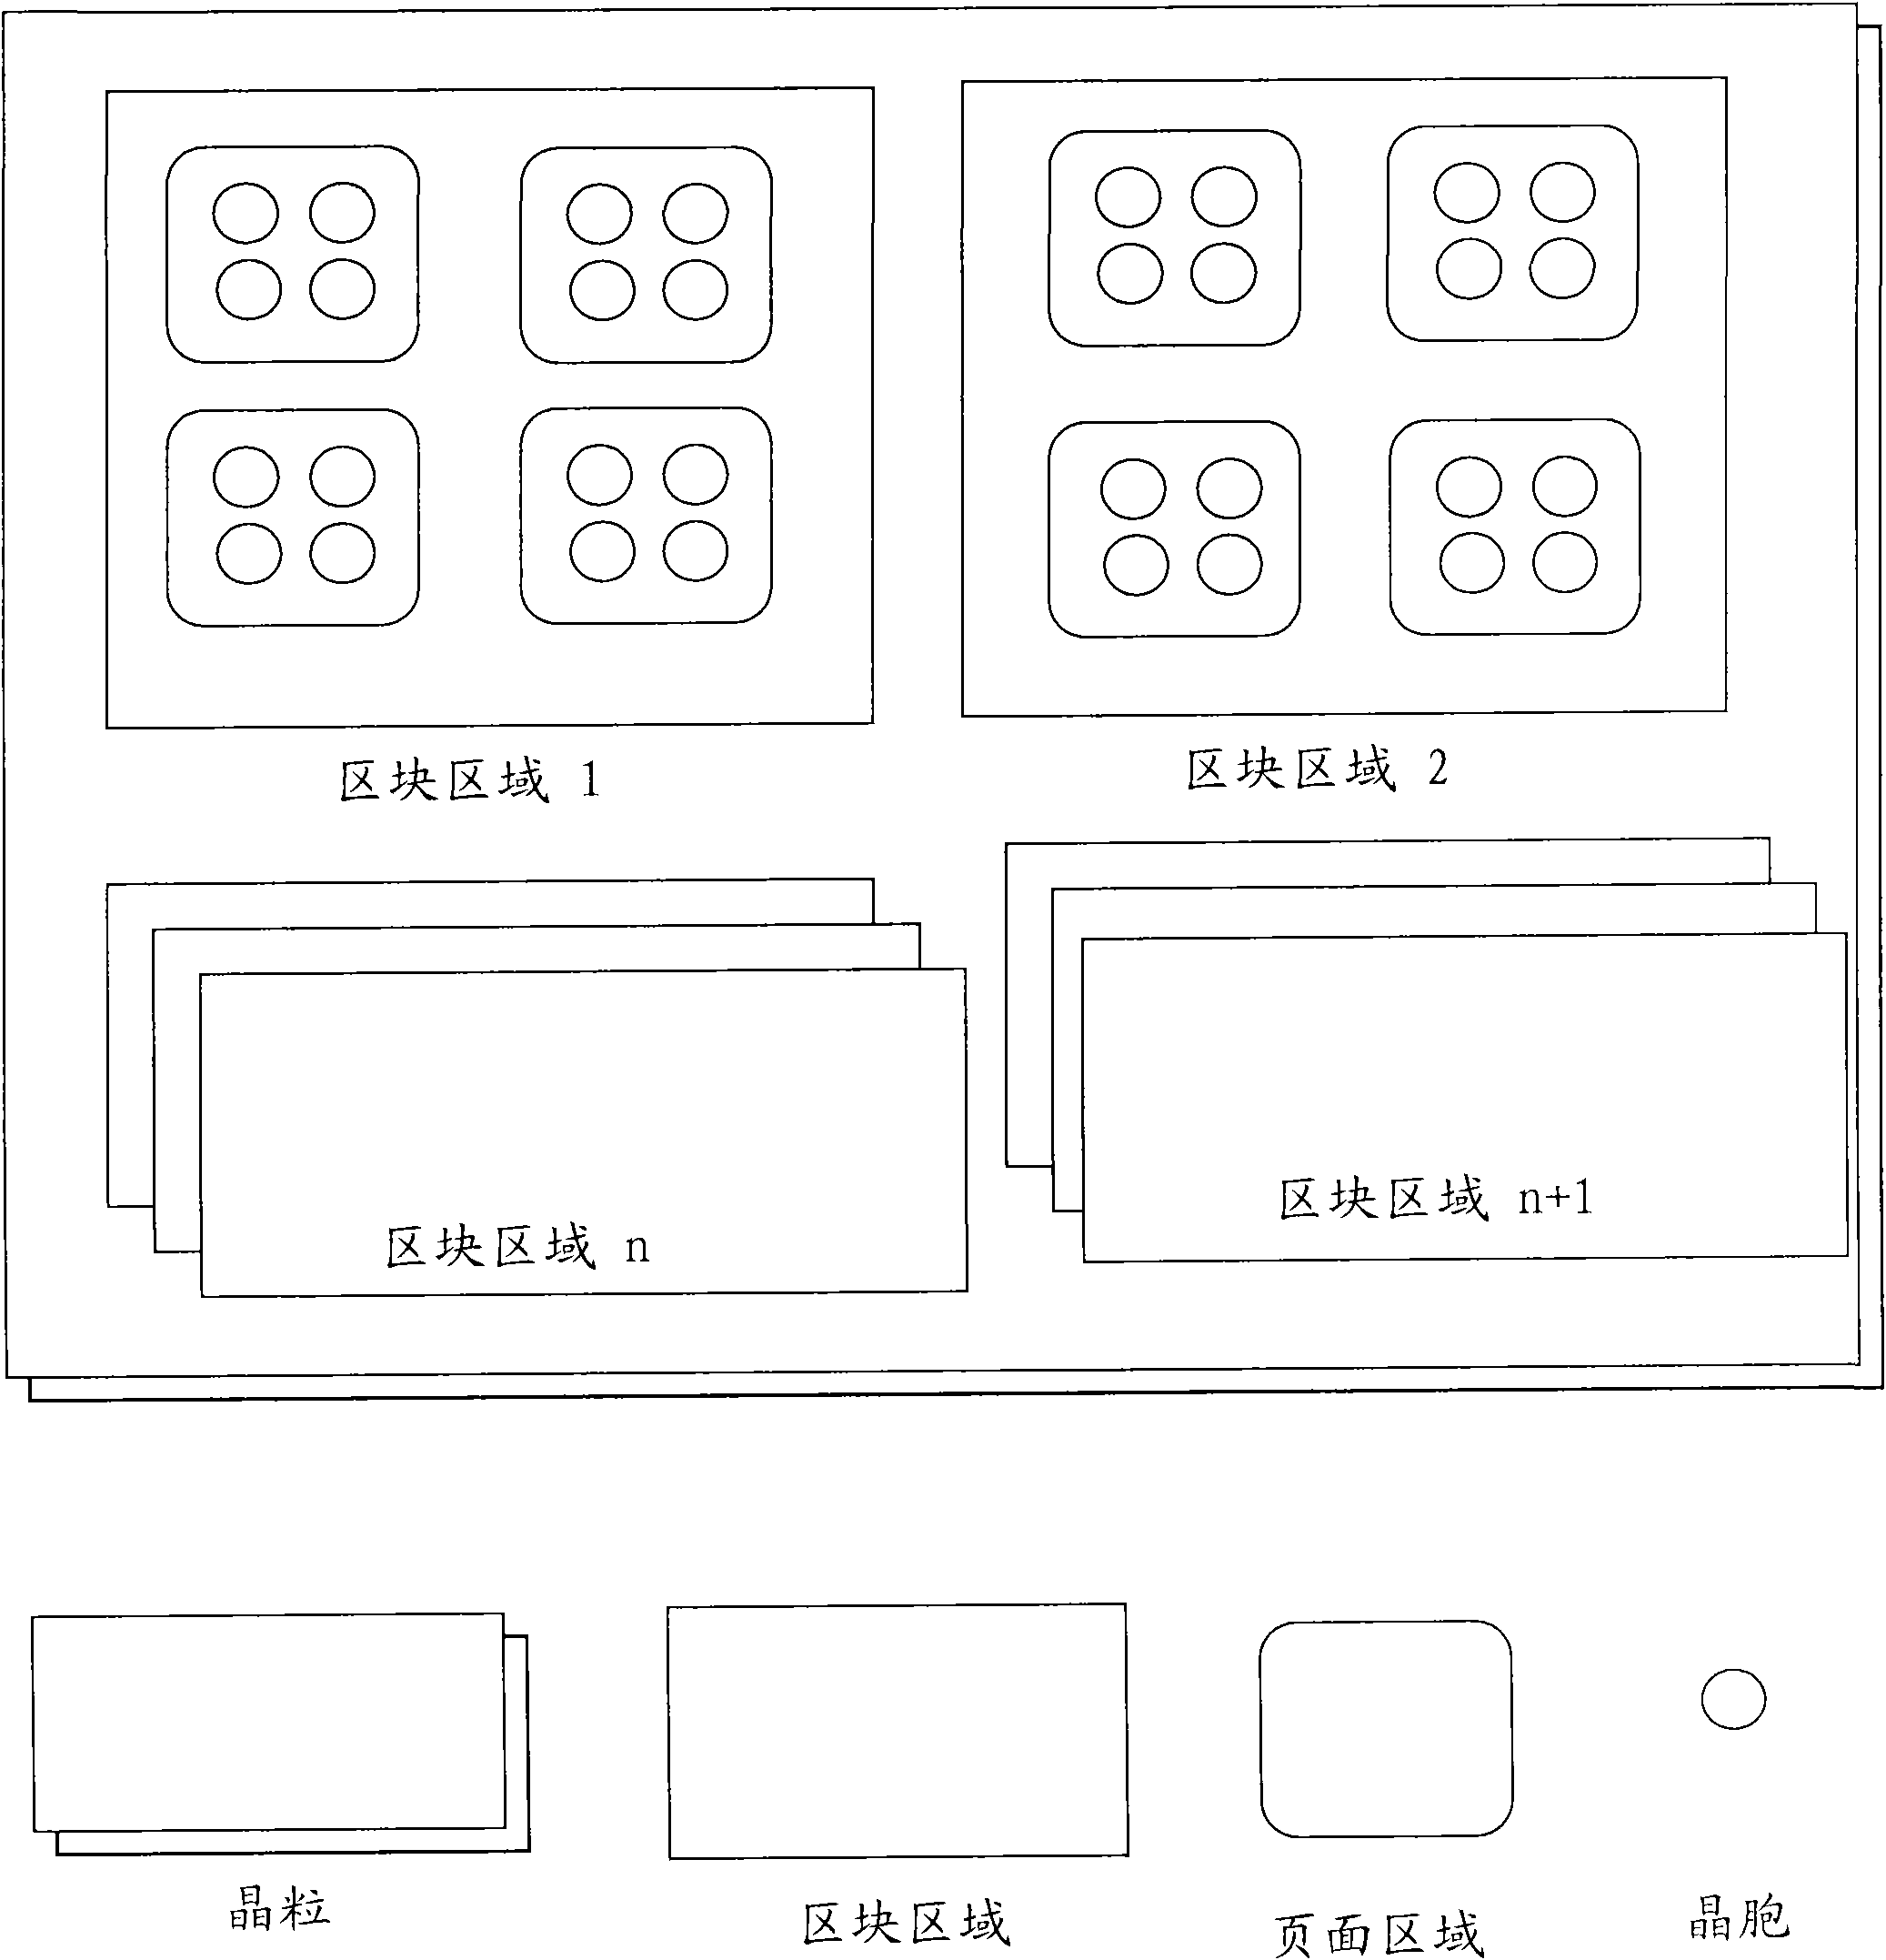 Method for reclaiming and rebuilding memory space